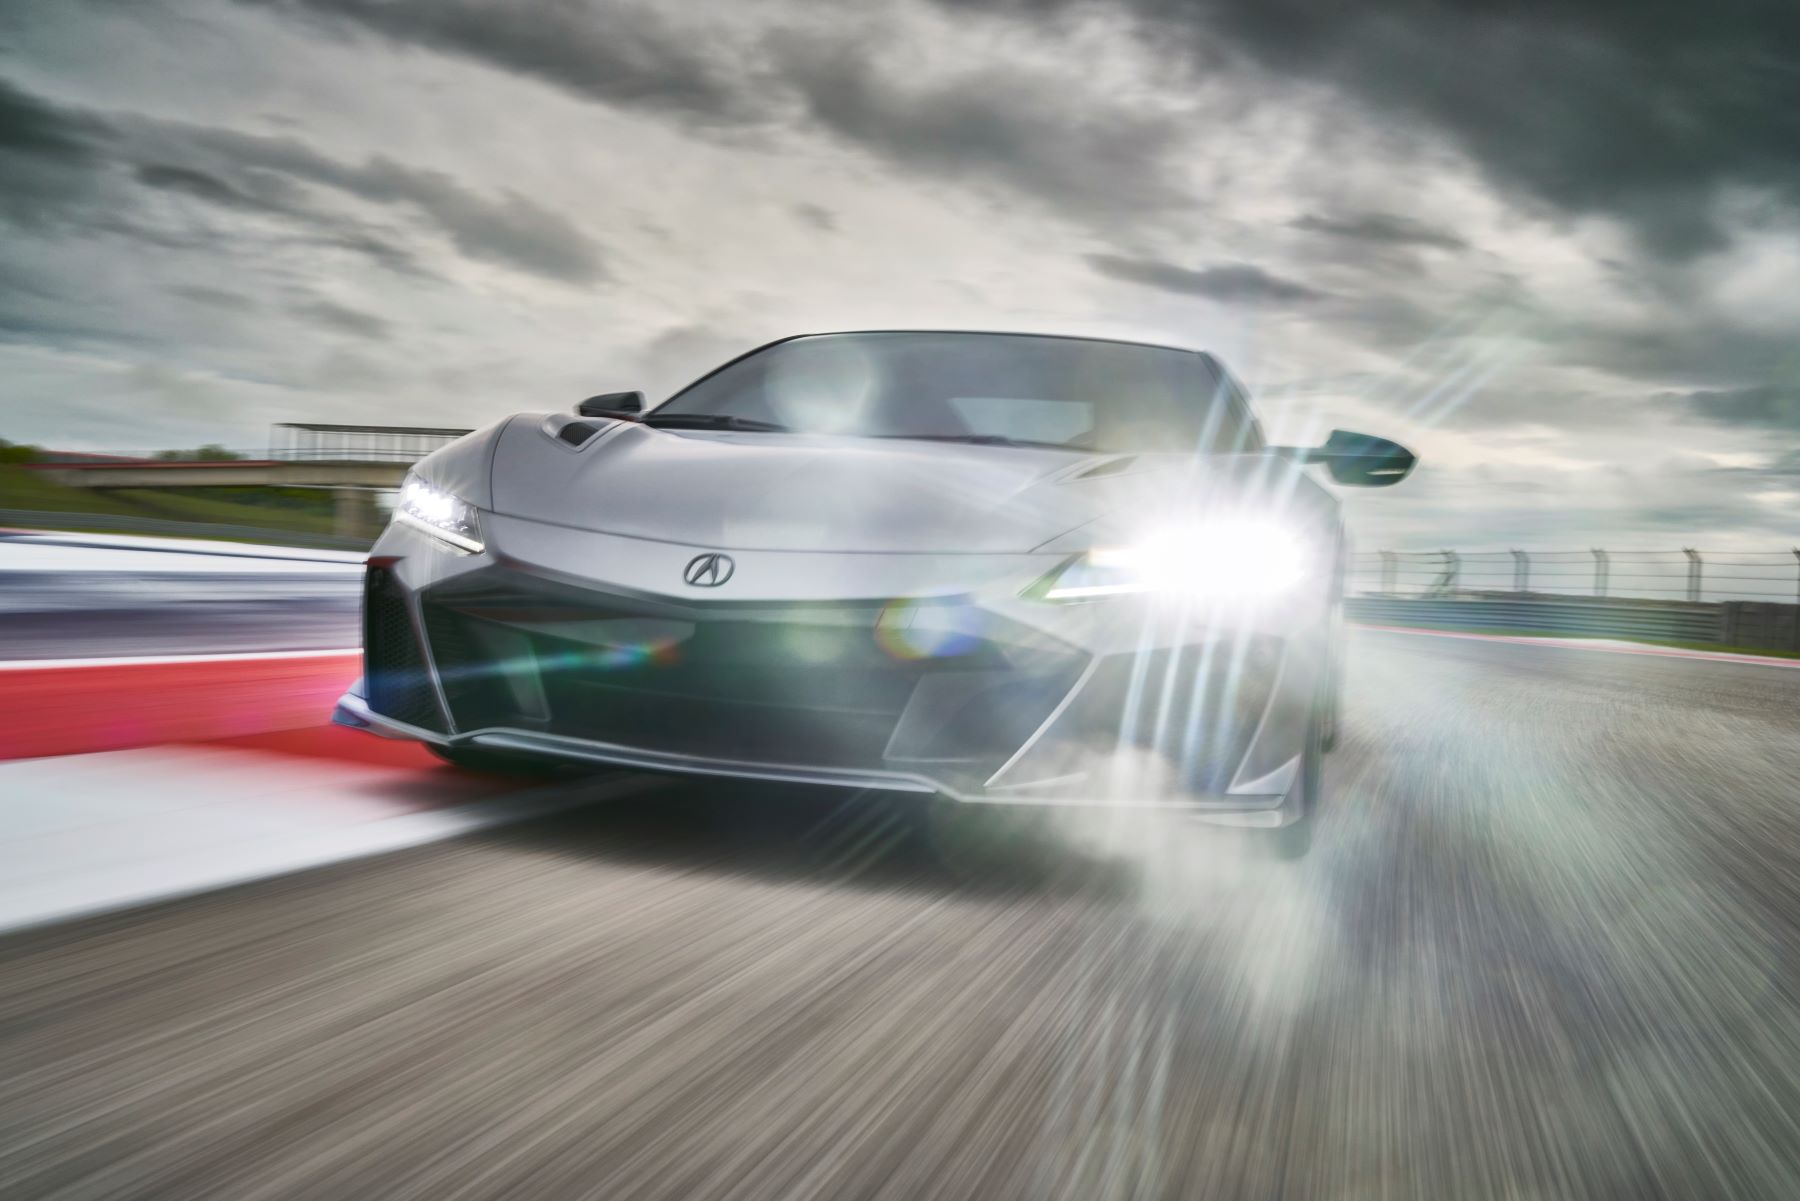 A gray 2022 Acura NSX Type S supercar driving on a racetrack under a stormy sky